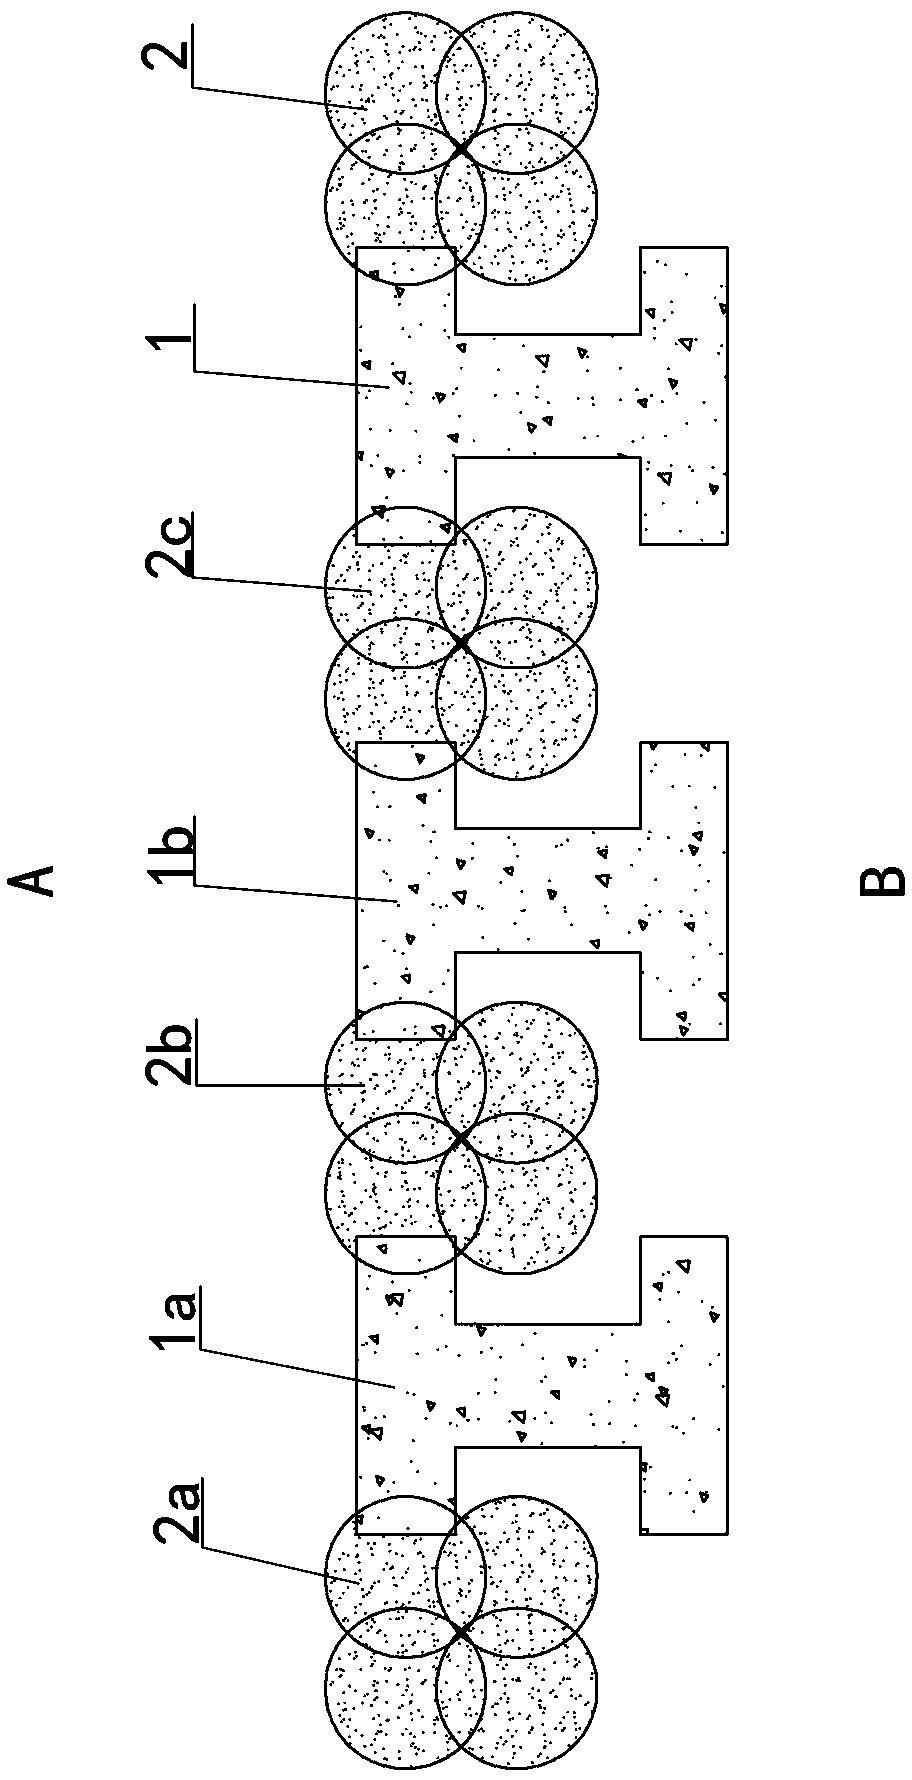 A construction method for a closed enclosure system of special-shaped cross-section support piles